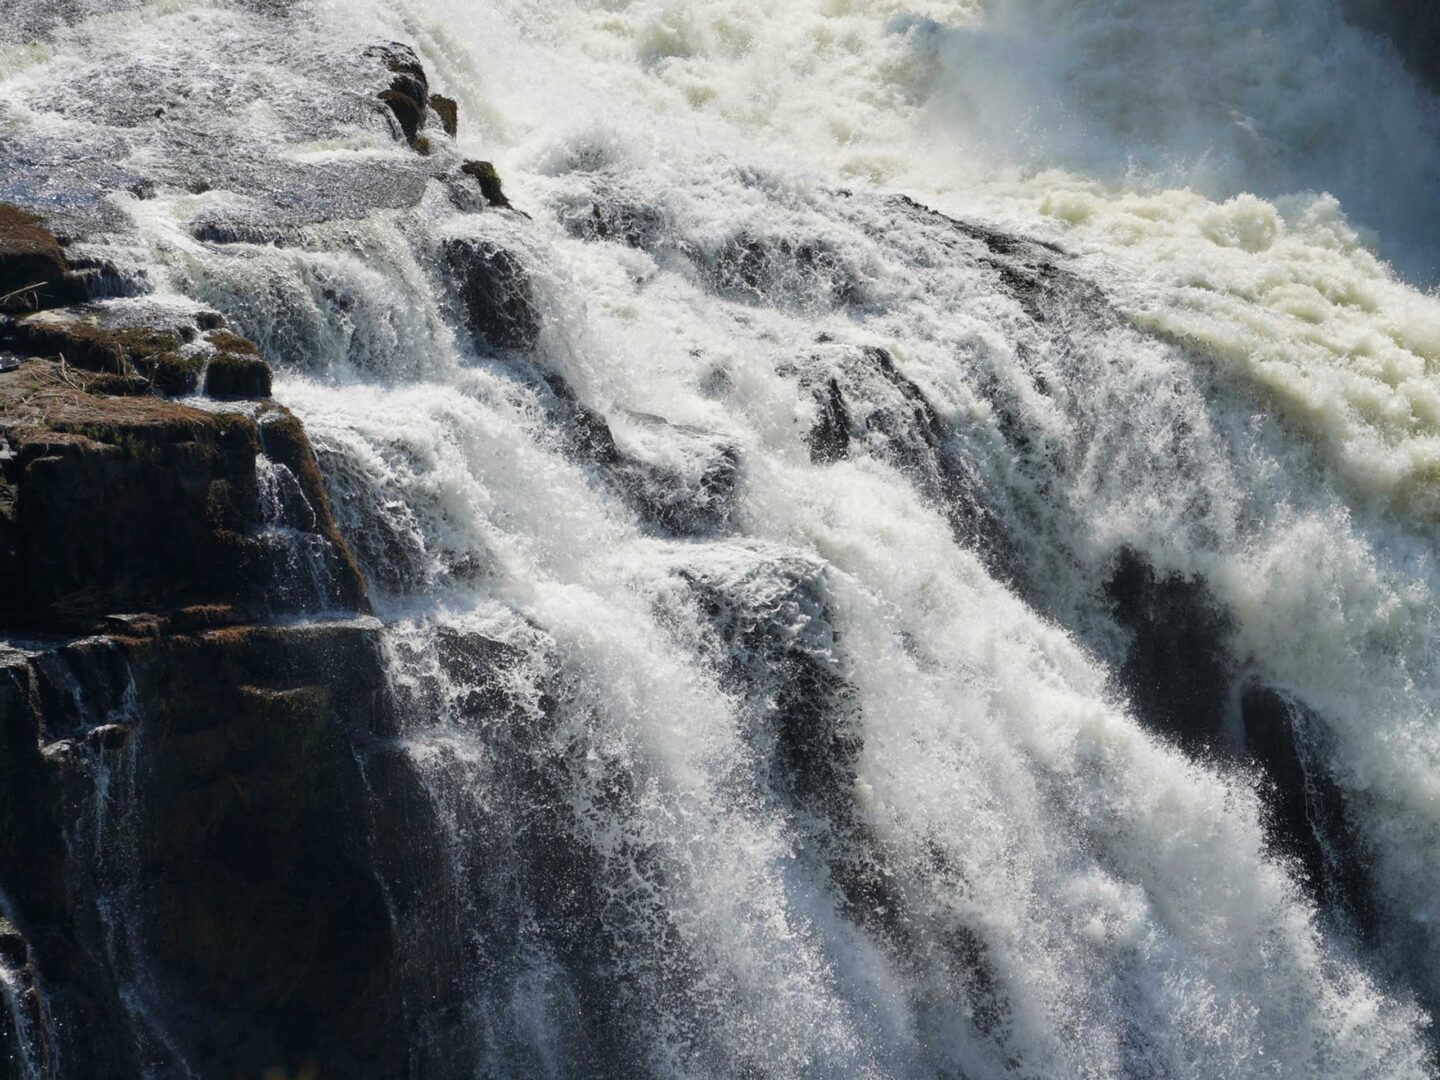 A person is standing on the side of a waterfall.